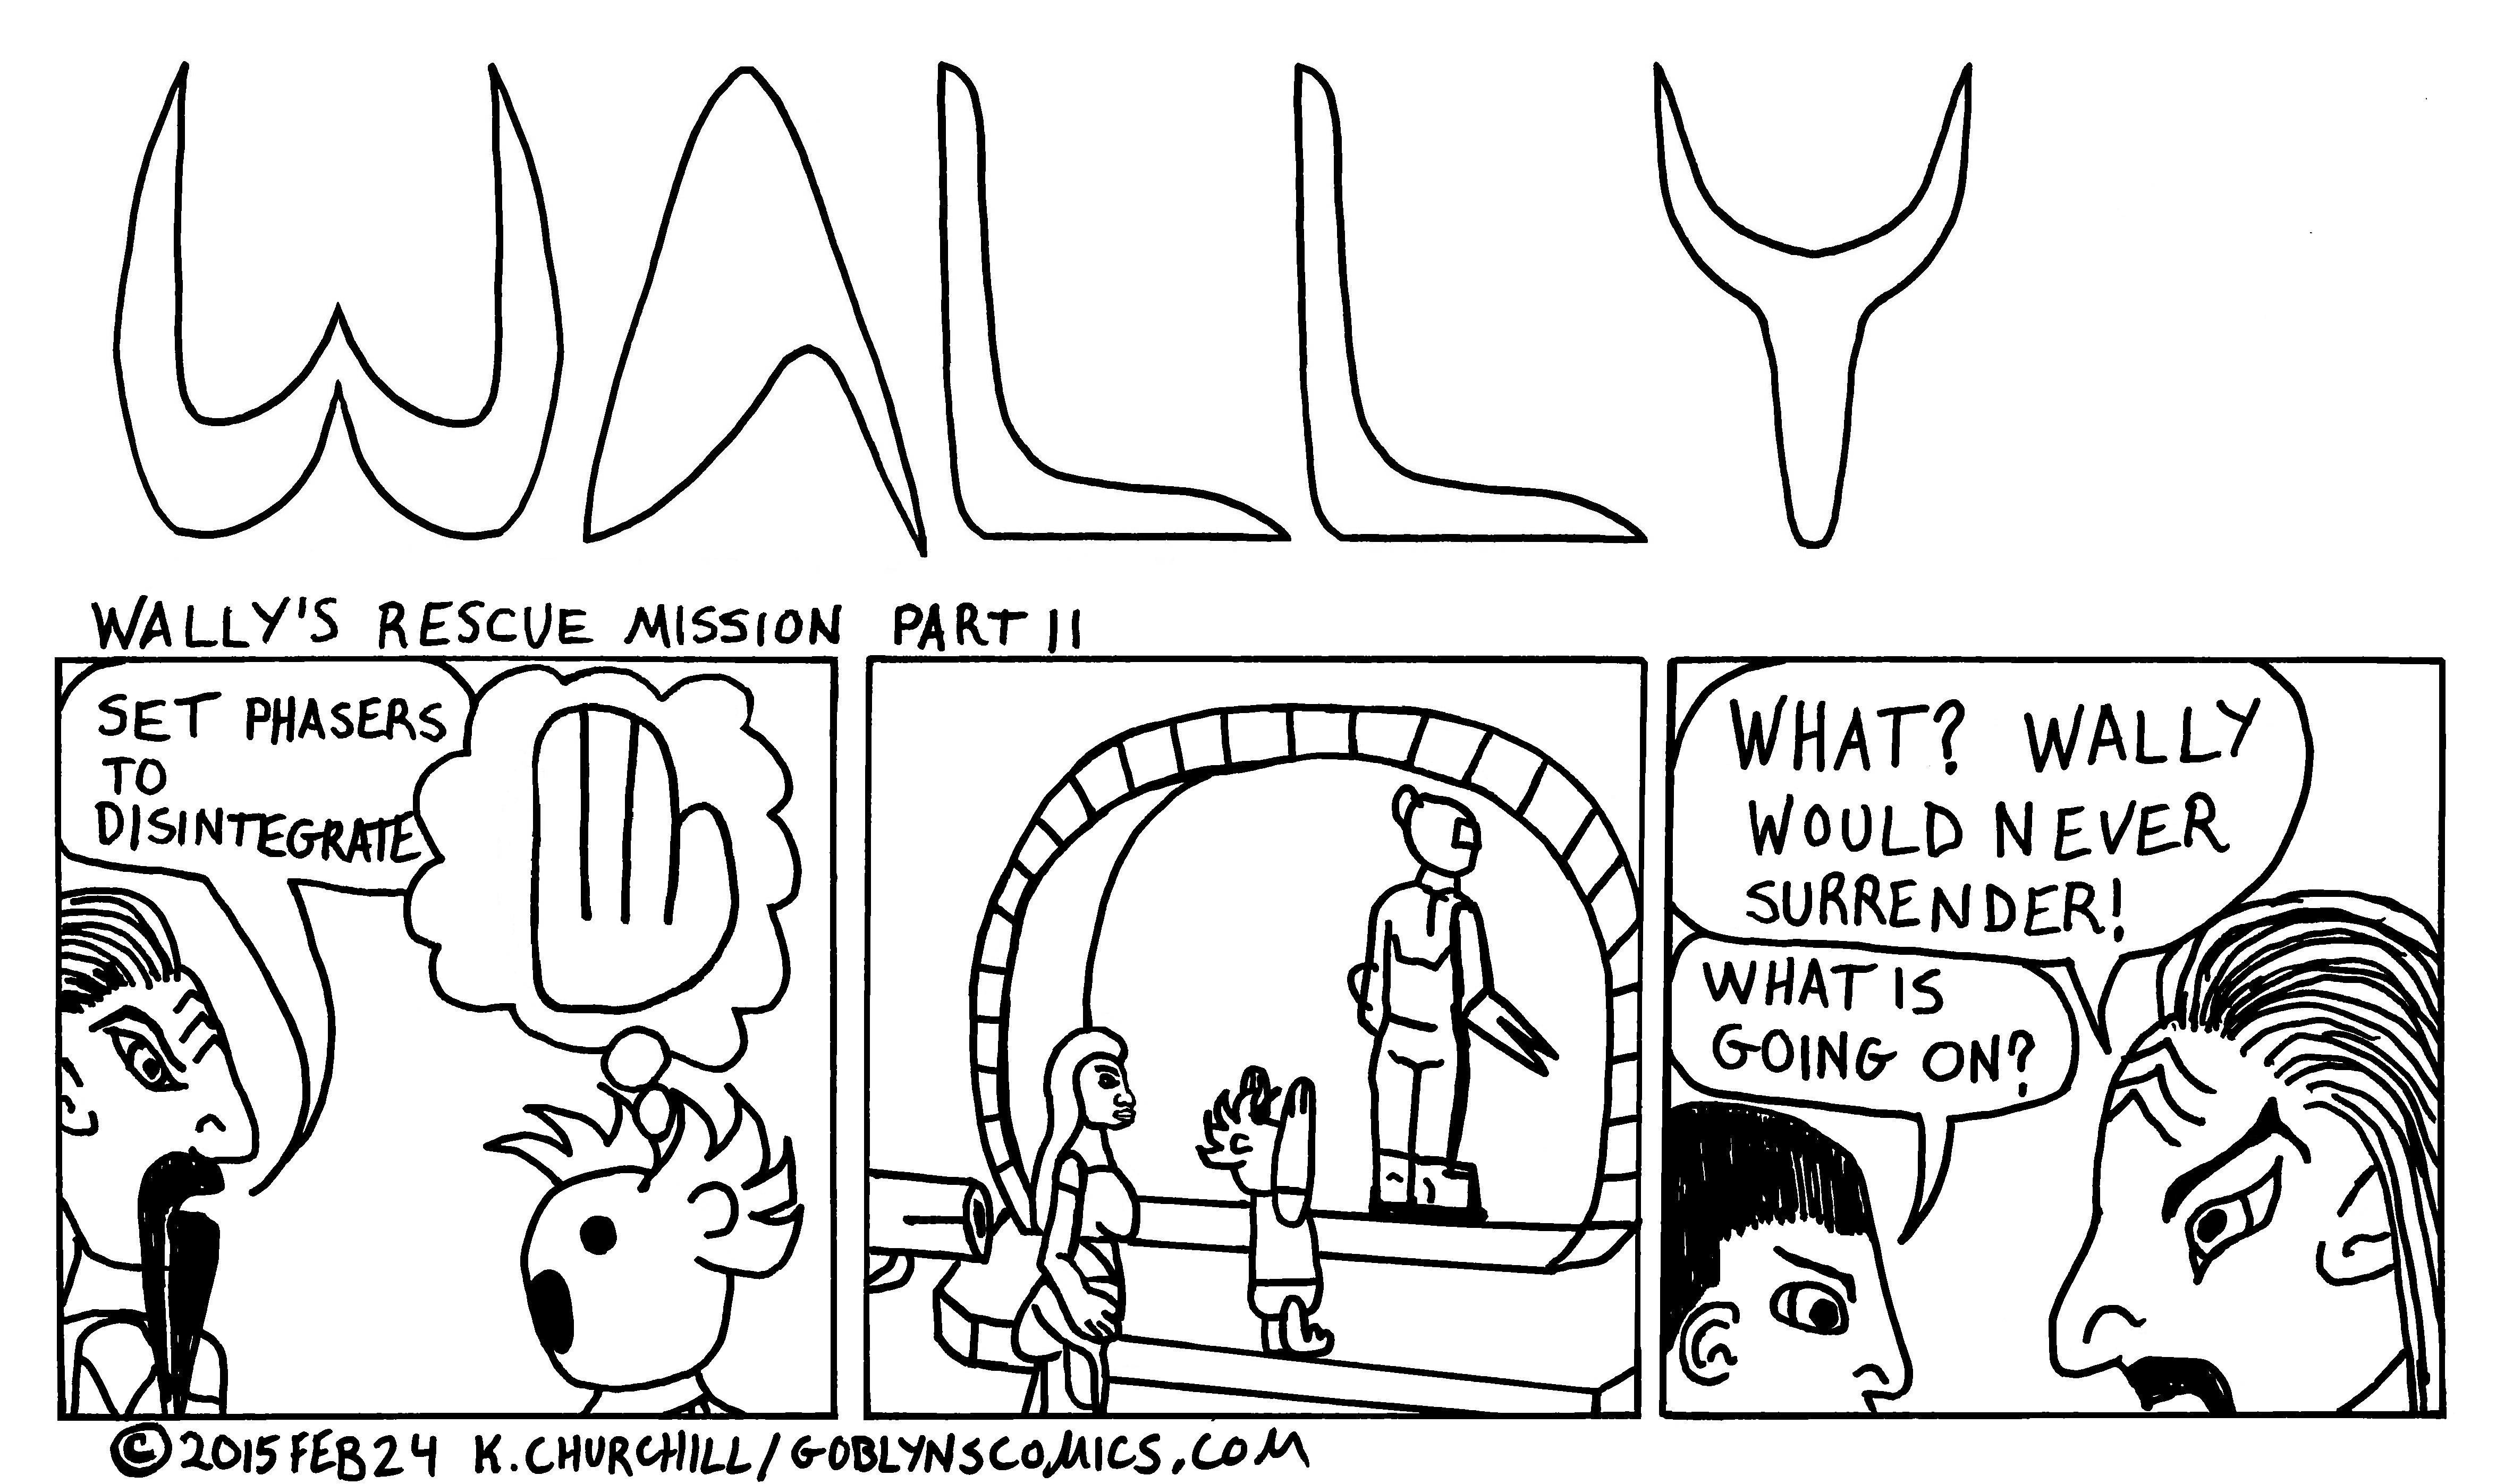 Wally's Rescue Mission Part 11: Wally surrenders?